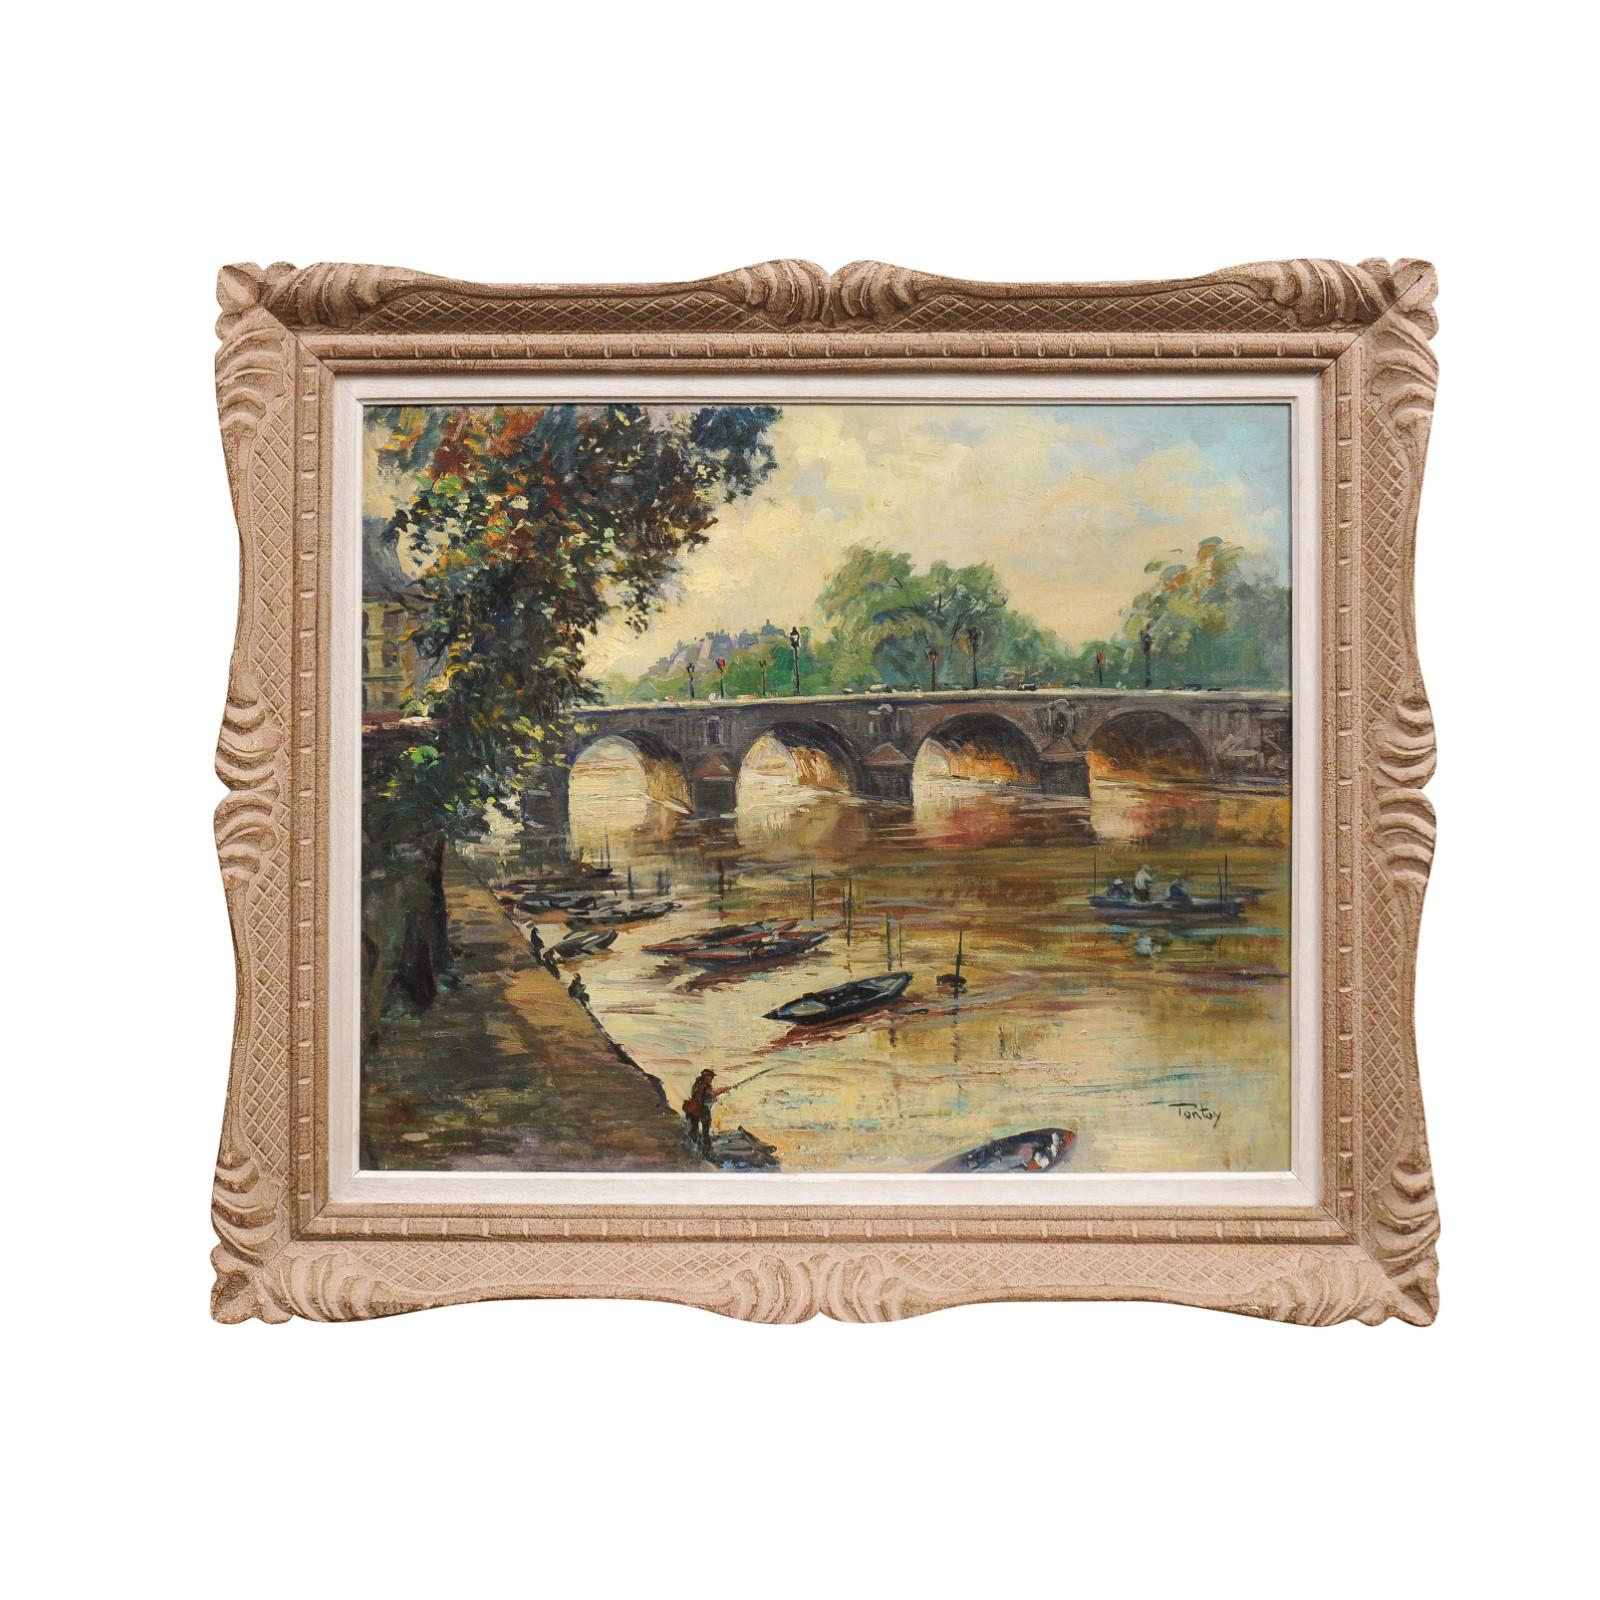 French Henri-Jean Pontoy oil on canvas painting of a Parisian scene depicting the Pont Neuf over the River Seine with fishermen and boats in the foreground in a carved wooden frame, signed lower right. This oil on canvas painting by French artist